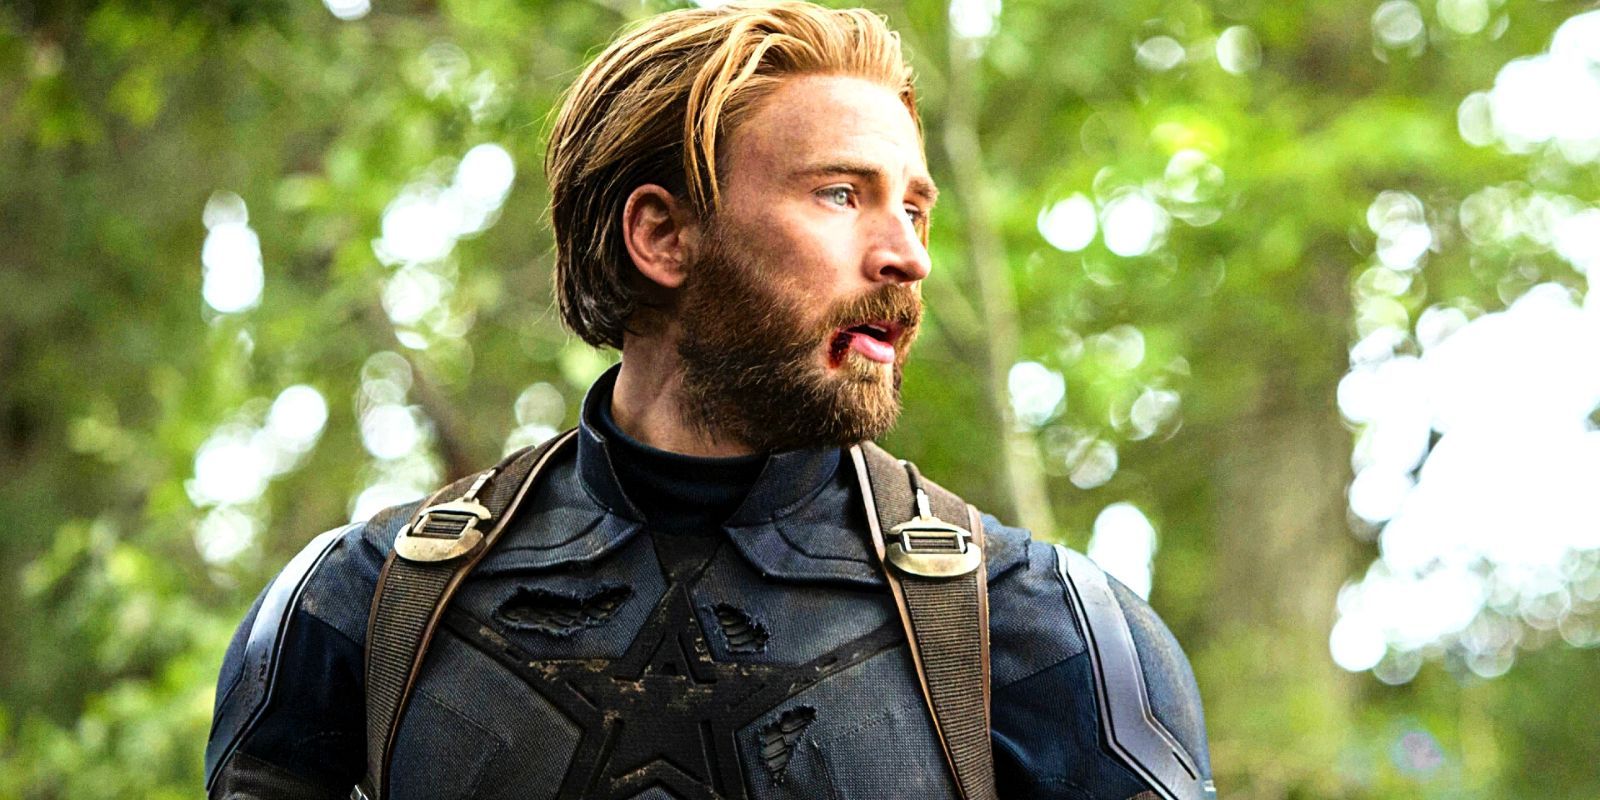 Chris Evans' Captain America looking agape to the right in a tattered uniform